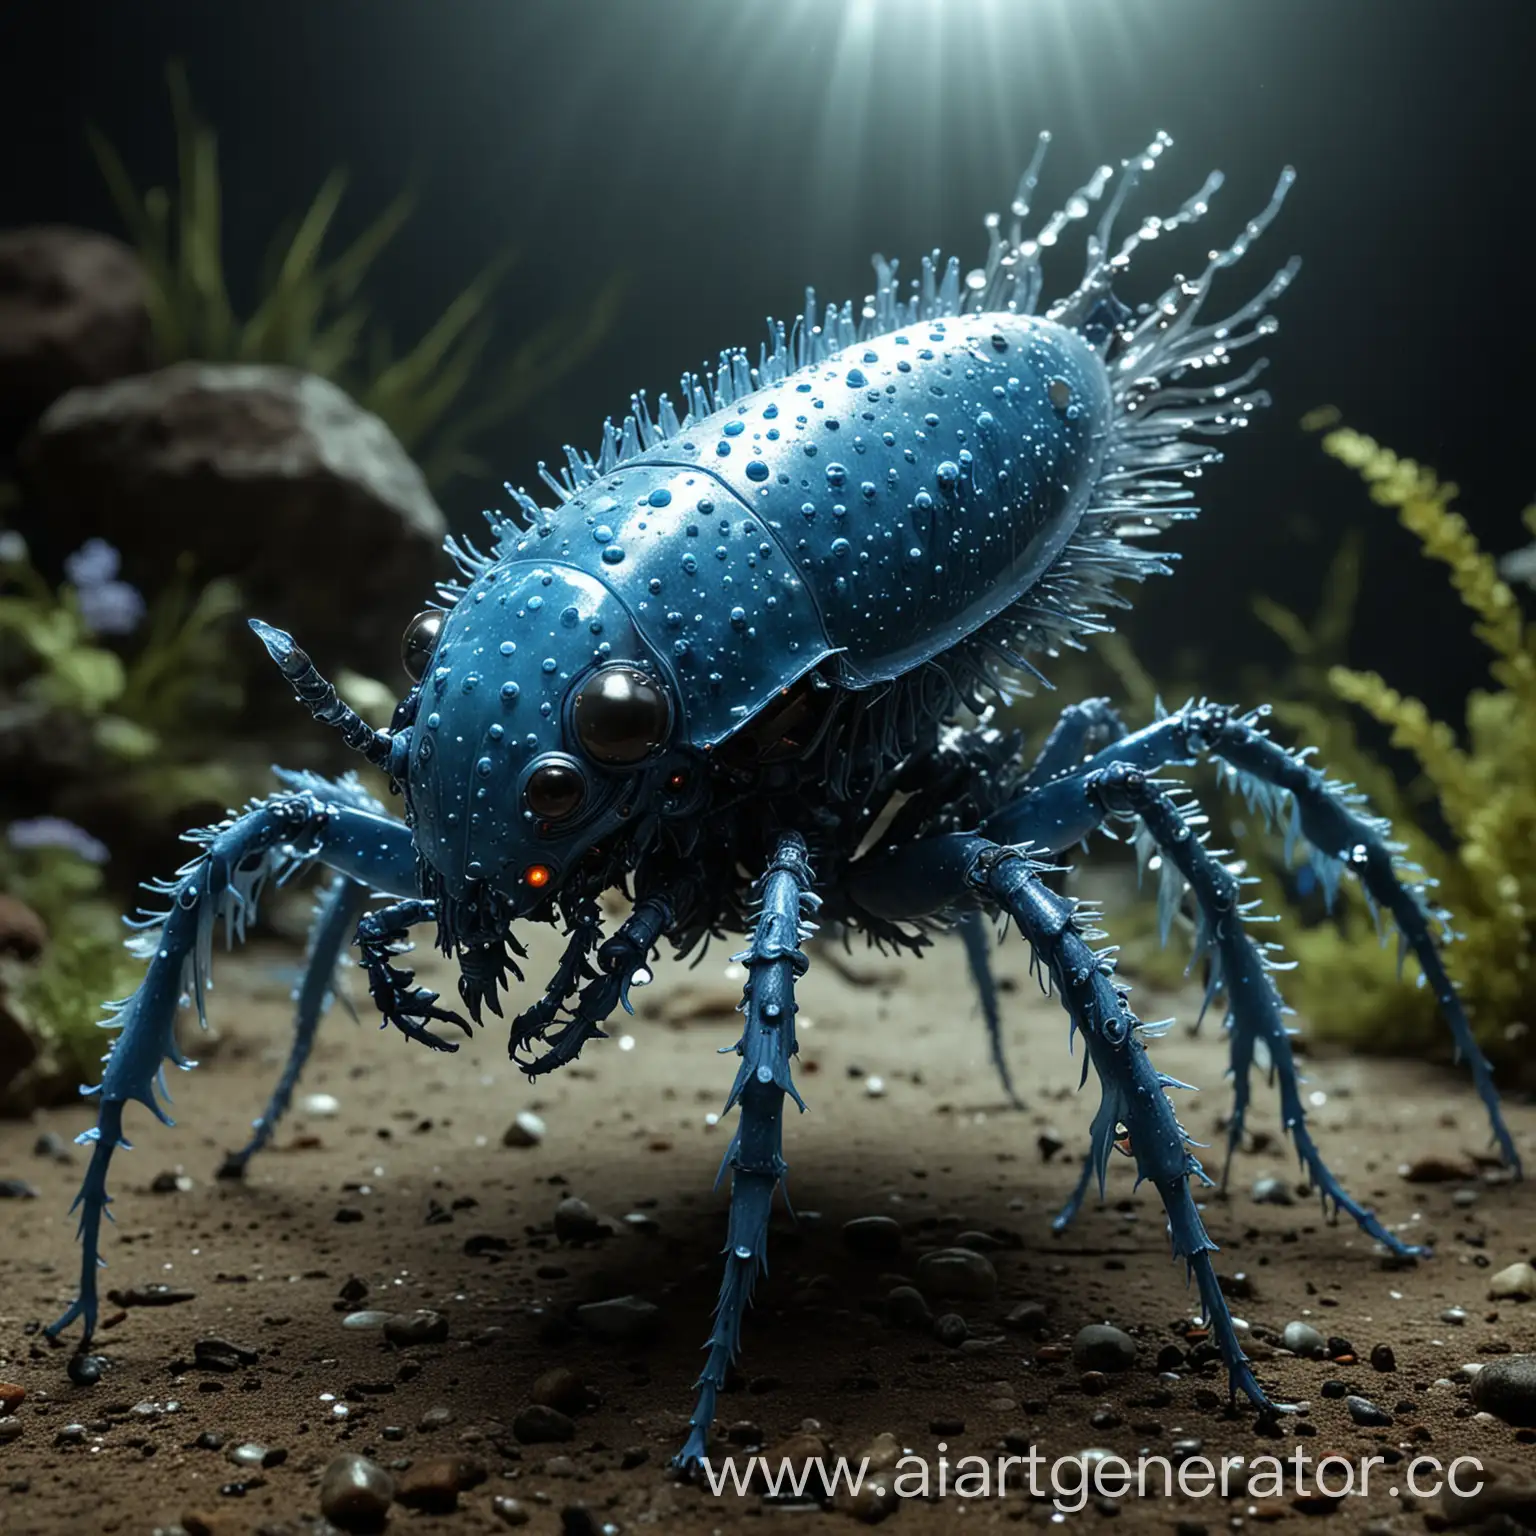 a large, hexapodal creature that resembles crustaceans and beetles. It has a spiny blue exoskeleton and a lengthy tail. Its exoskeleton is adorned with bioluminescent speckles present in either the form of rings or dots, and it has a horn protruding from its carapace. It also appears to have an electrical current running from the floating gem above its head to the gem on its tail-base.